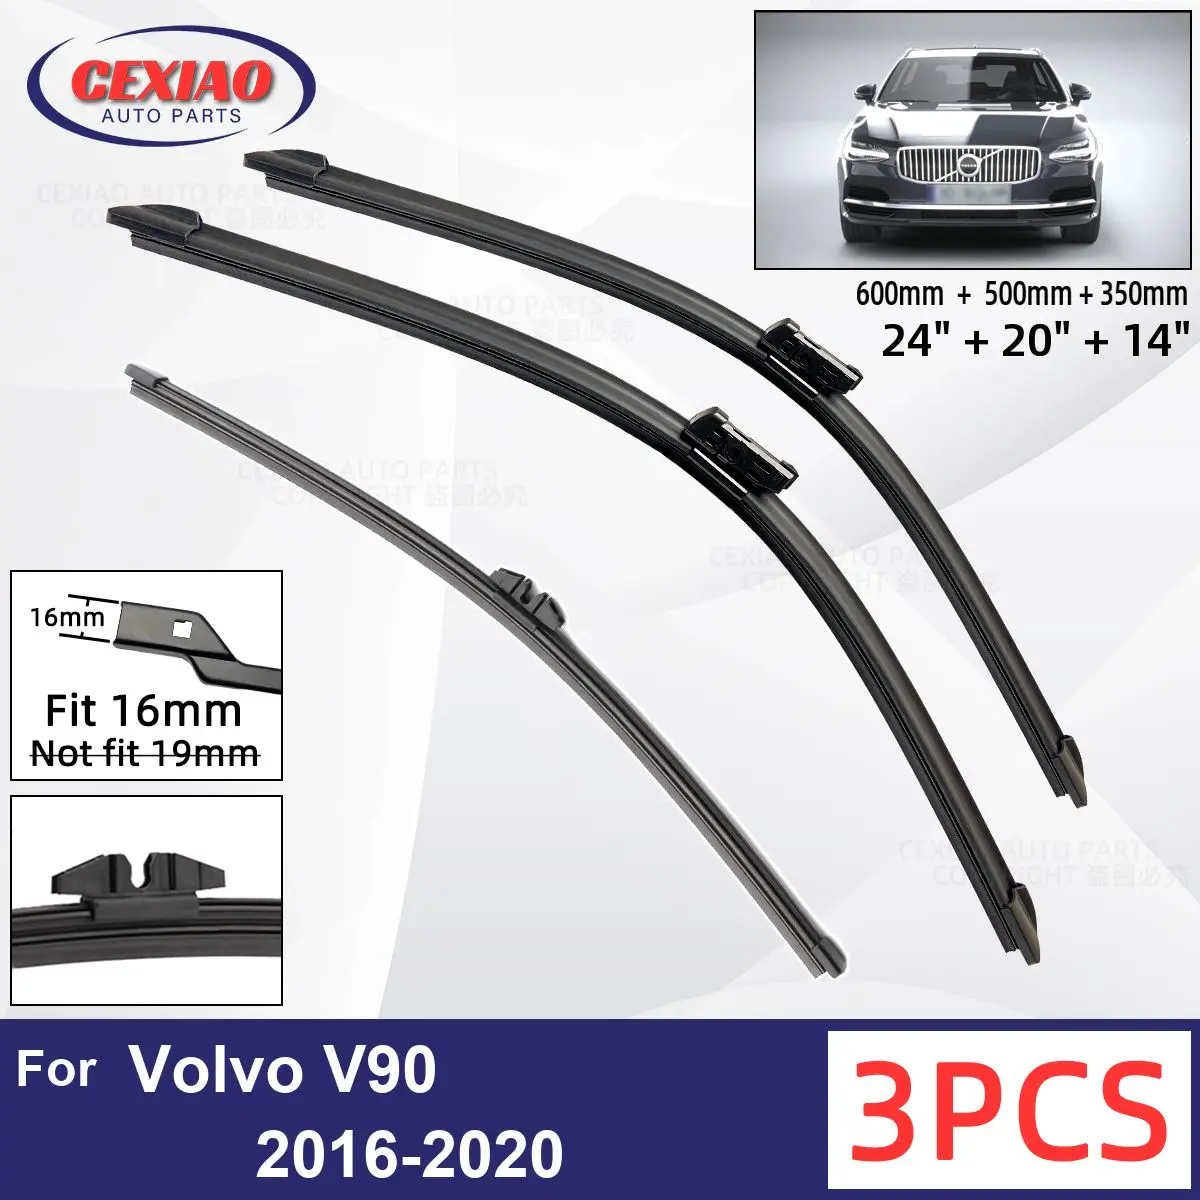 

For Volvo V90 2016 - 2020 Car Front Rear Wiper Blades Soft Rubber Windscreen Wipers Auto Windshield 24"+20"+14" 2017 2018 2019